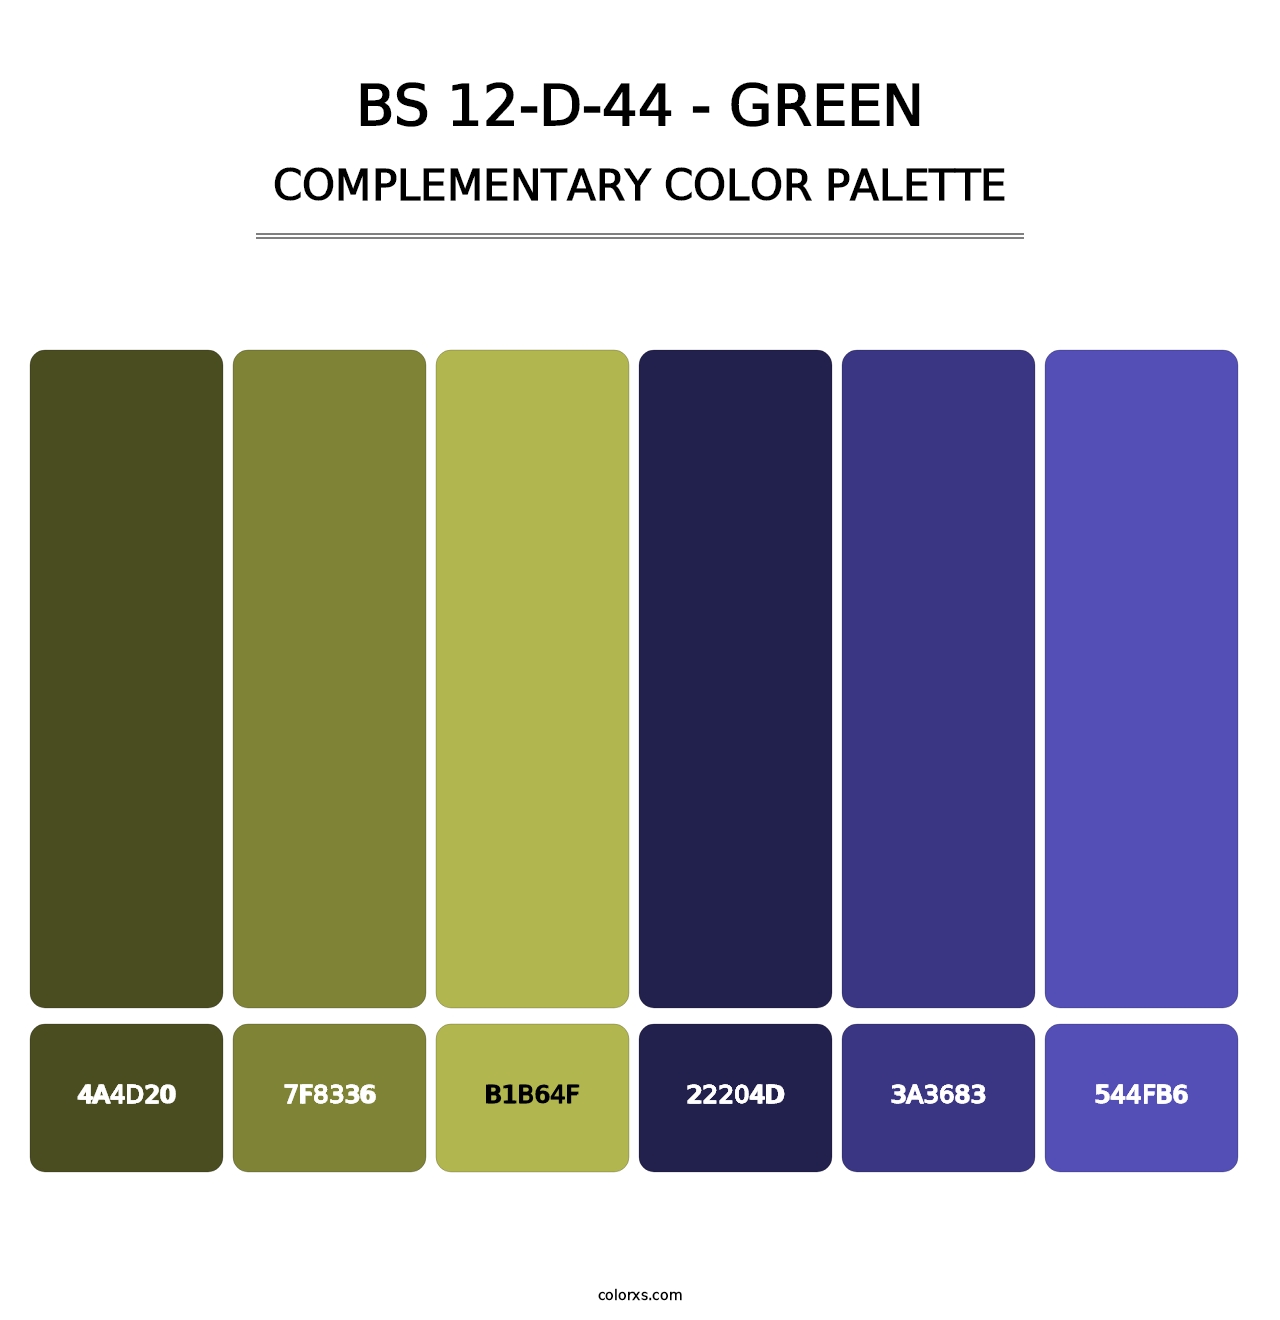 BS 12-D-44 - Green - Complementary Color Palette